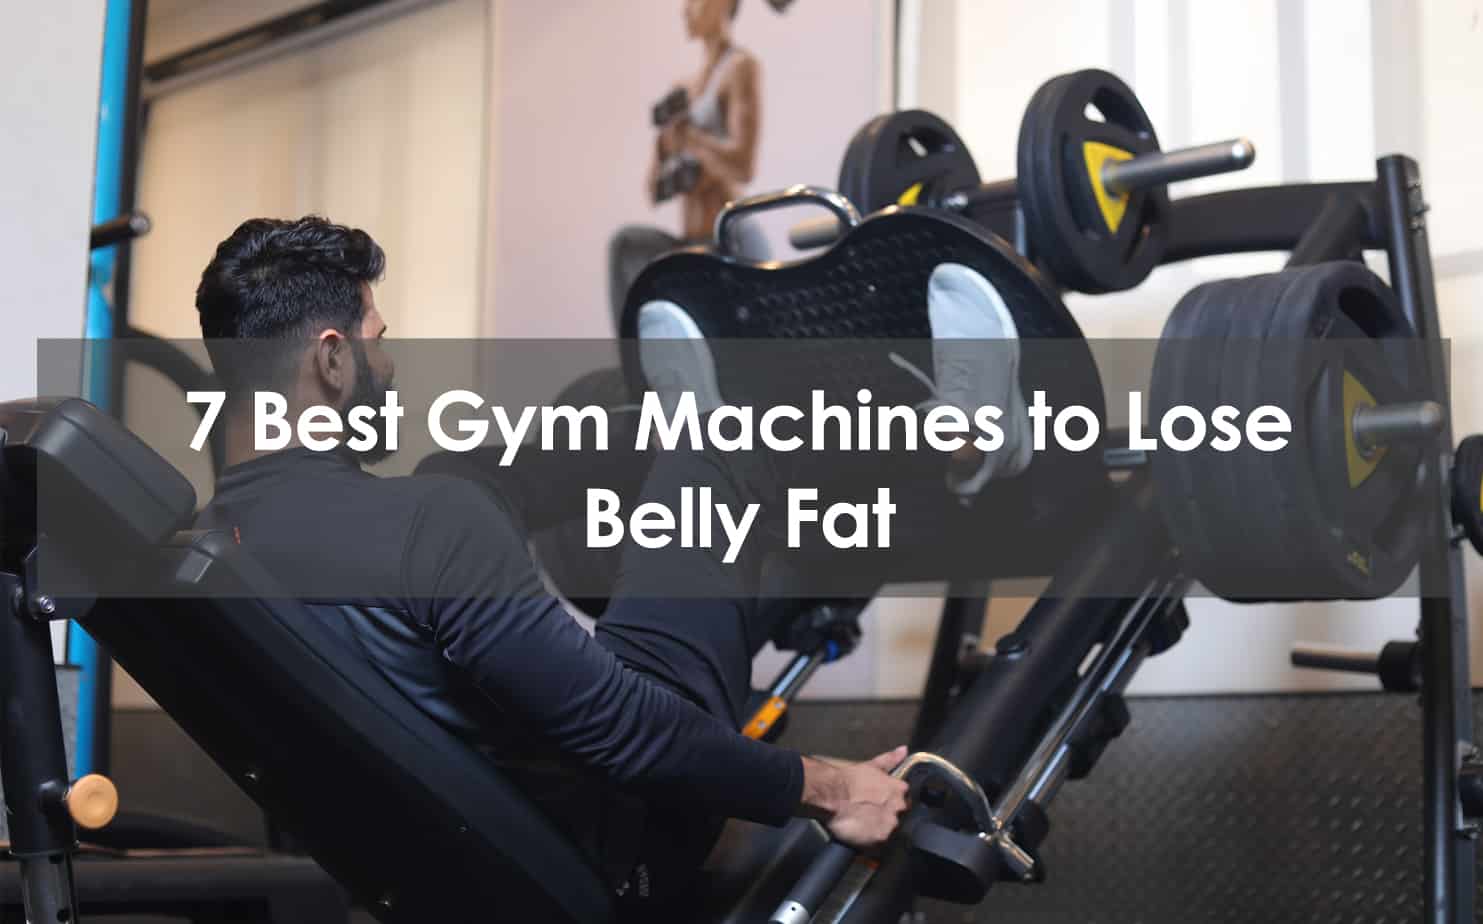 Which Exercise Machine Is Best for Losing Belly Fat?